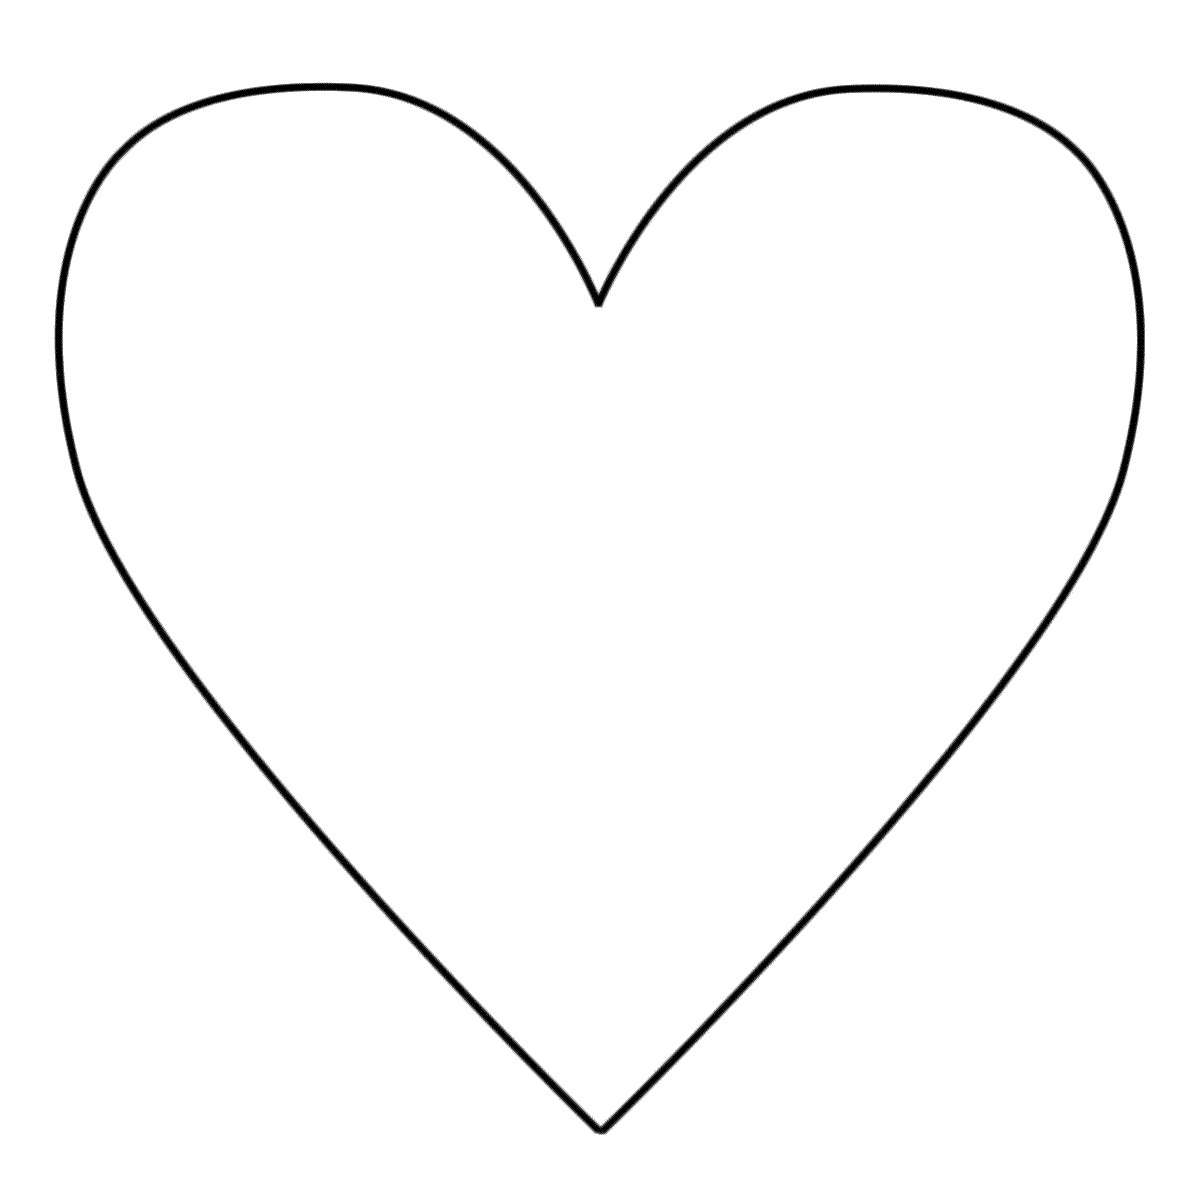 Free Printable Heart Coloring Pages For Kids special Heart ...